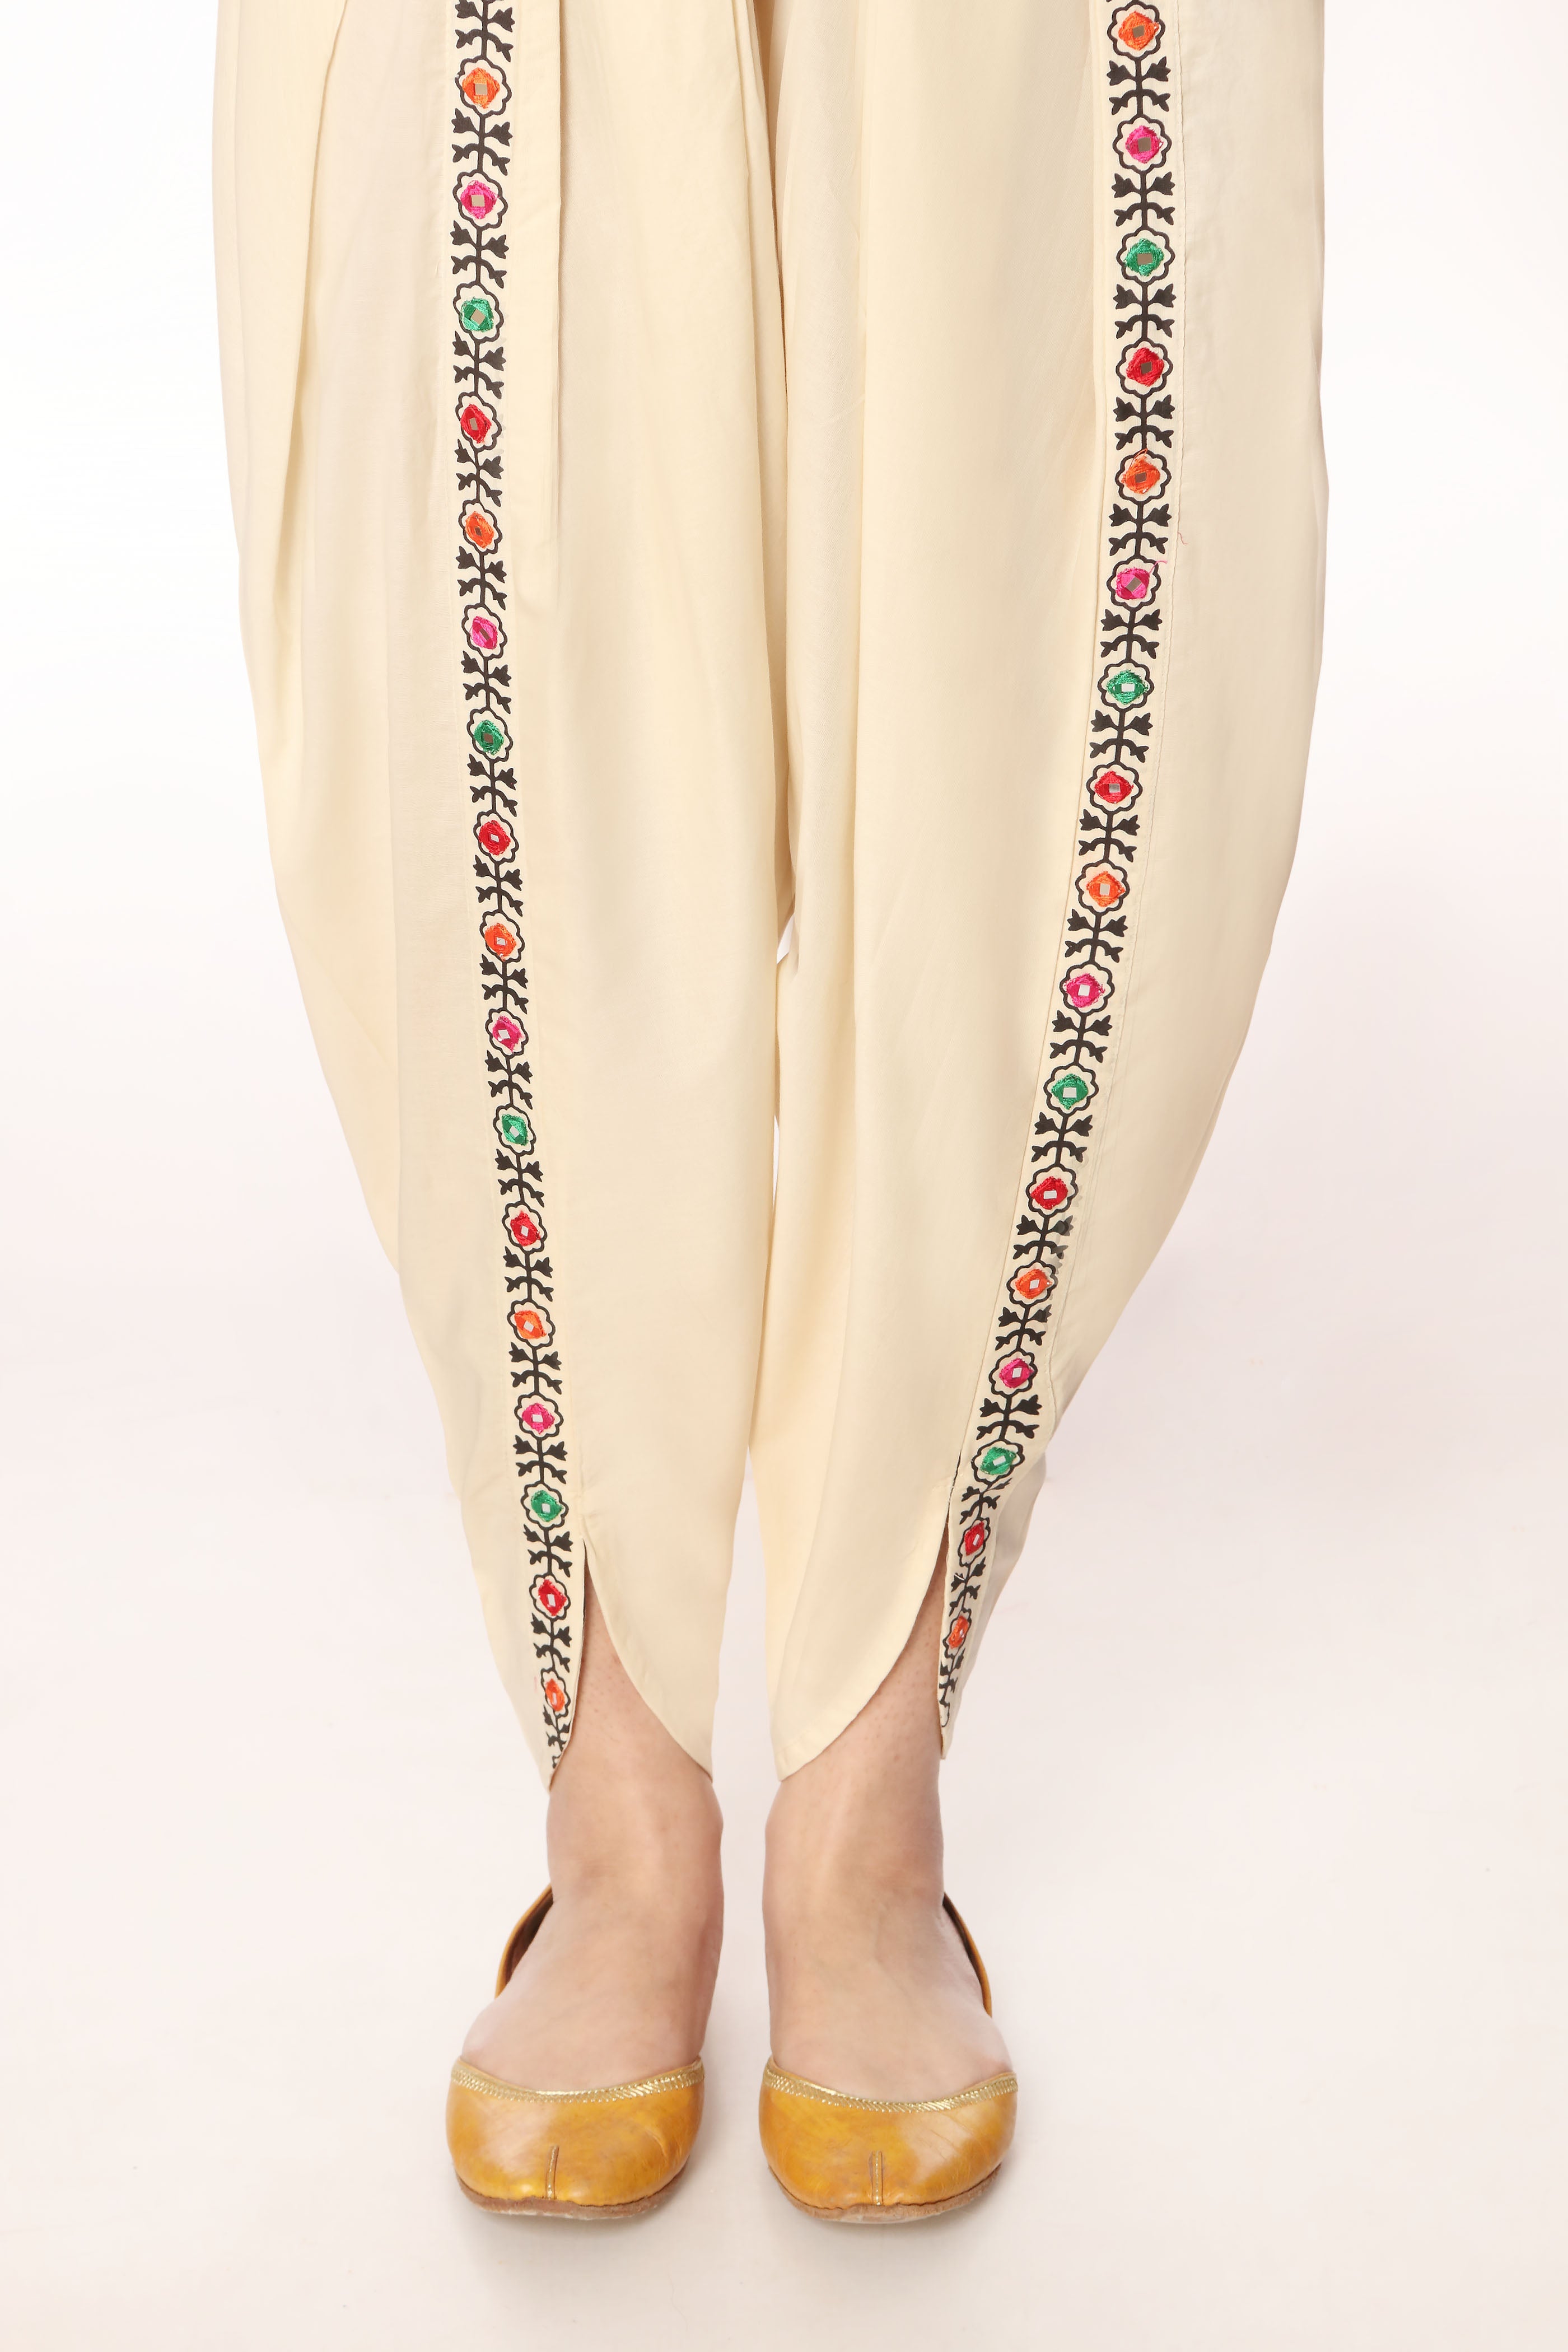 Tulip Sheesha in Off White coloured Printed Lawn fabric